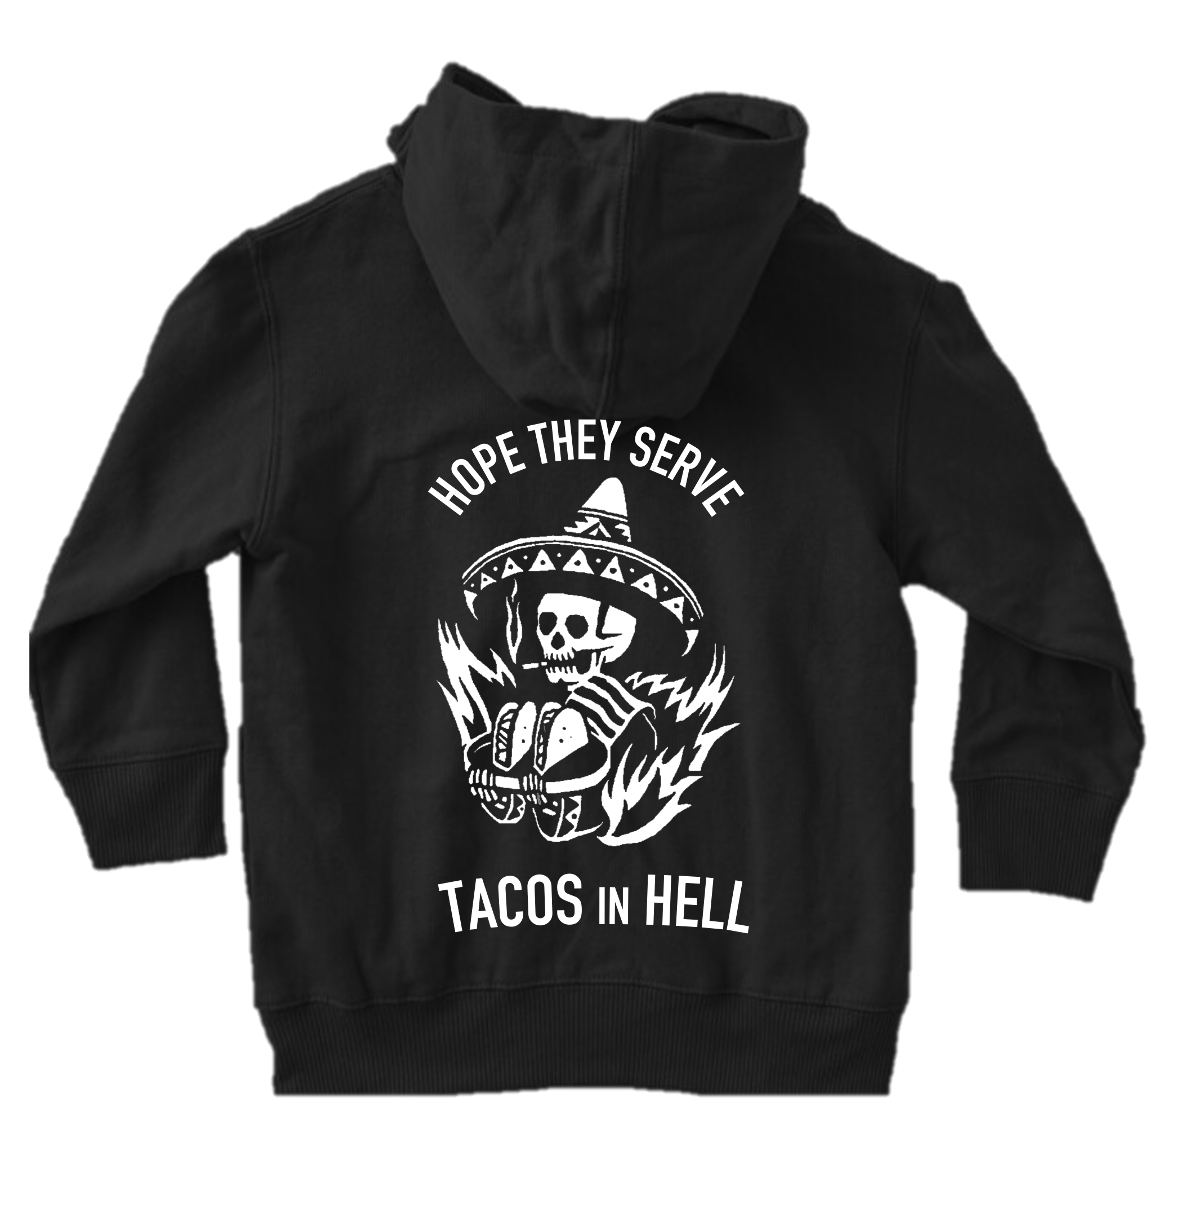 I HOPE THEY SERVE TACOS IN HELL